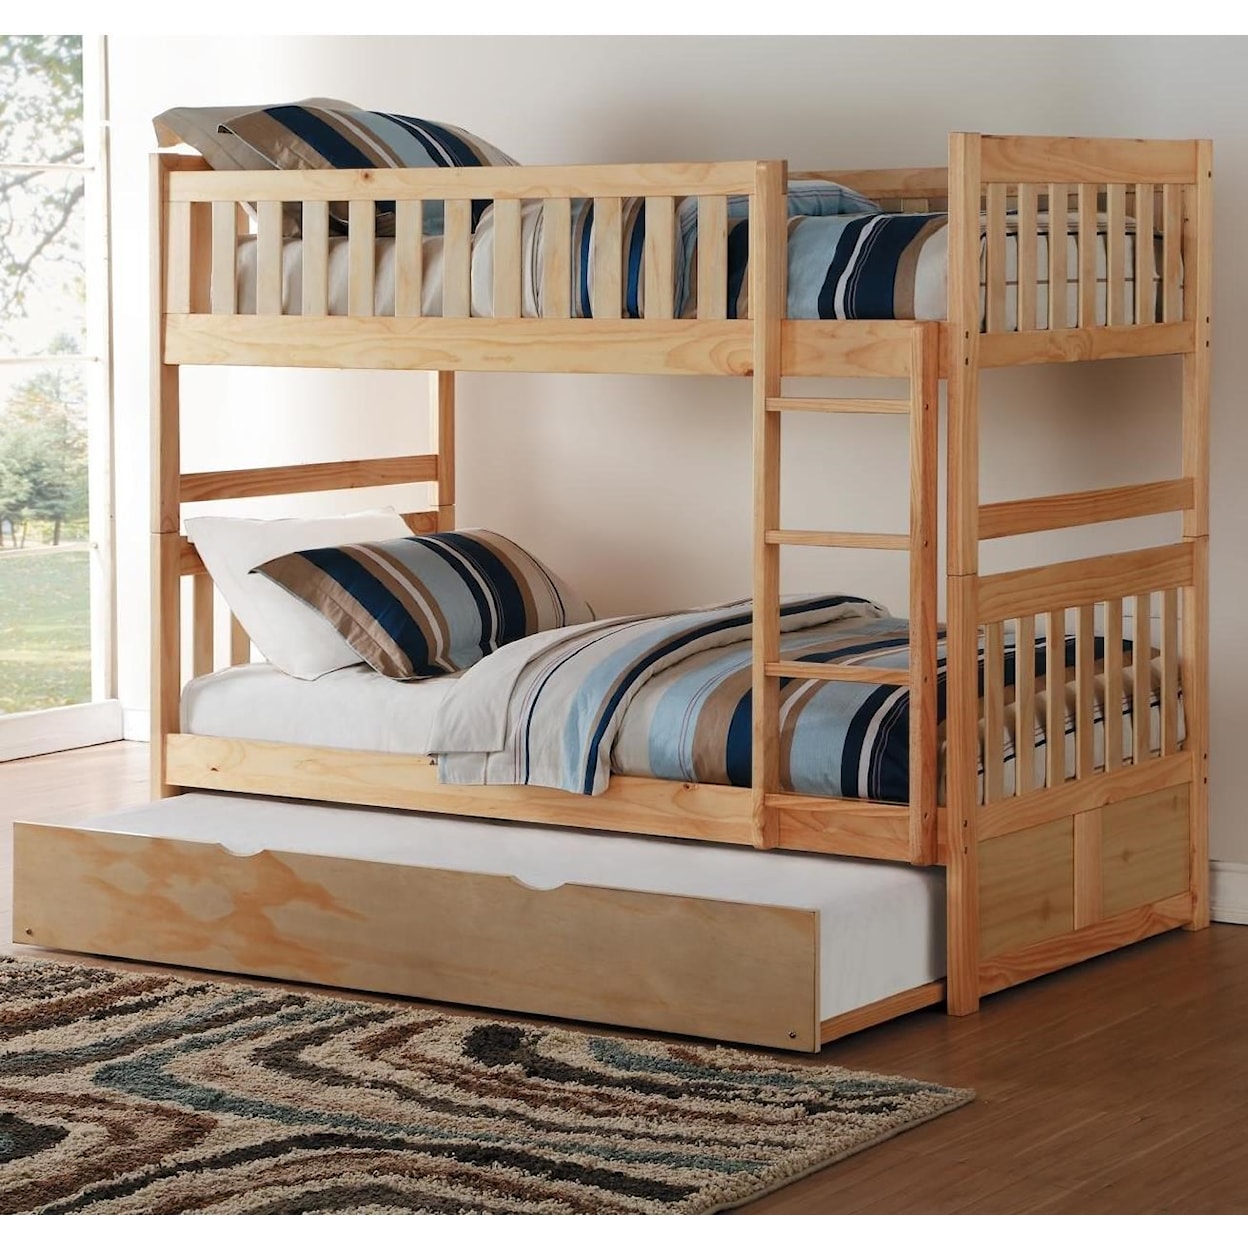 Homelegance Bartly Twin/Twin Bunk Bed